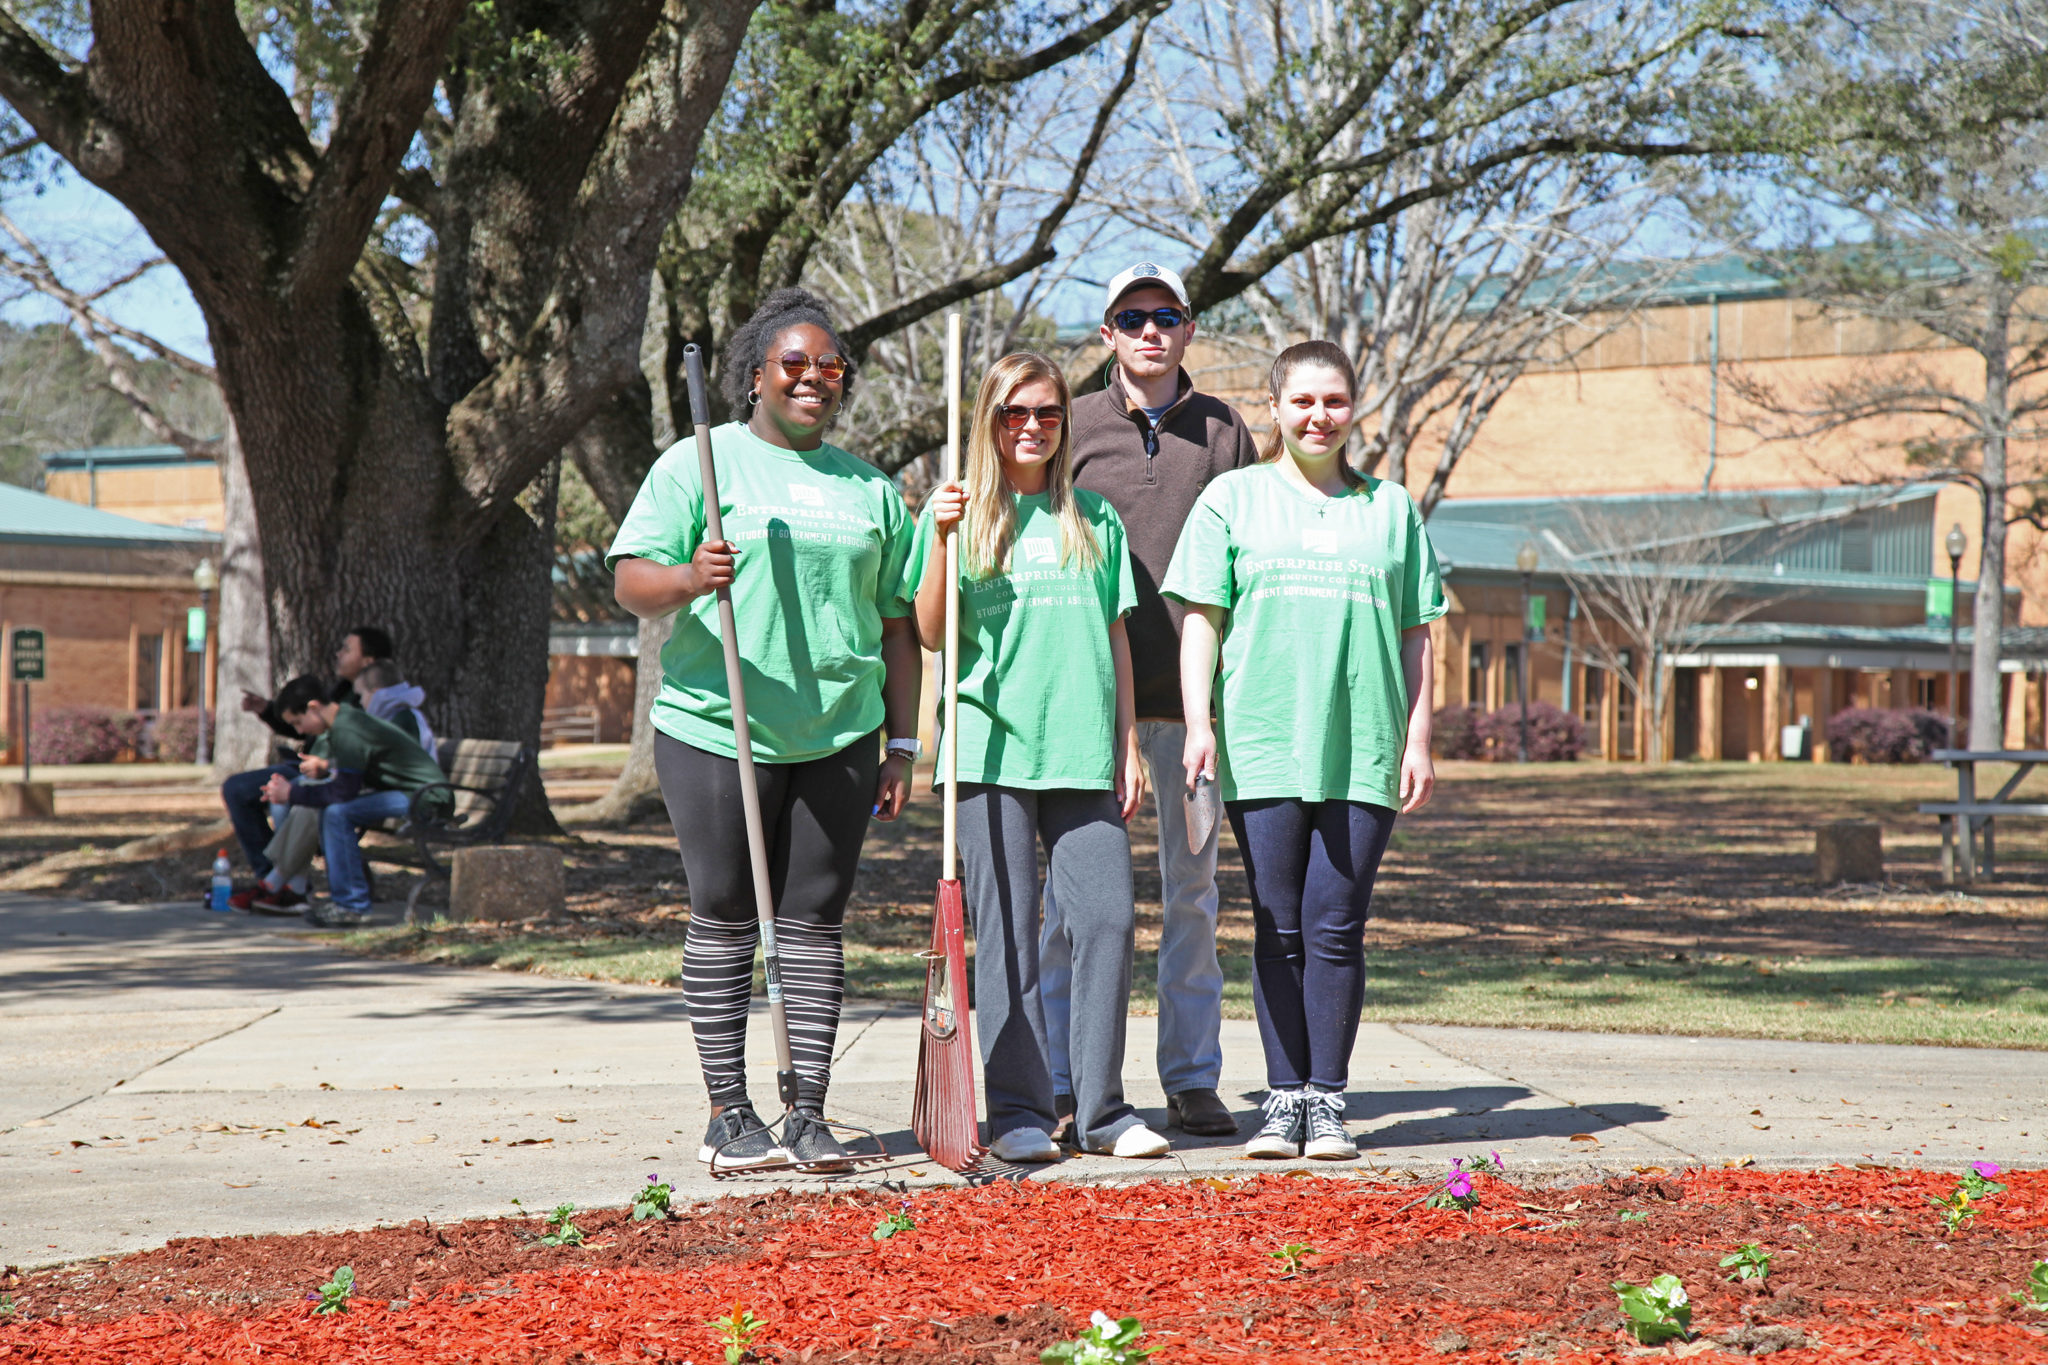 ESCC’s Student Government Association use proceeds from fall event into beautification project